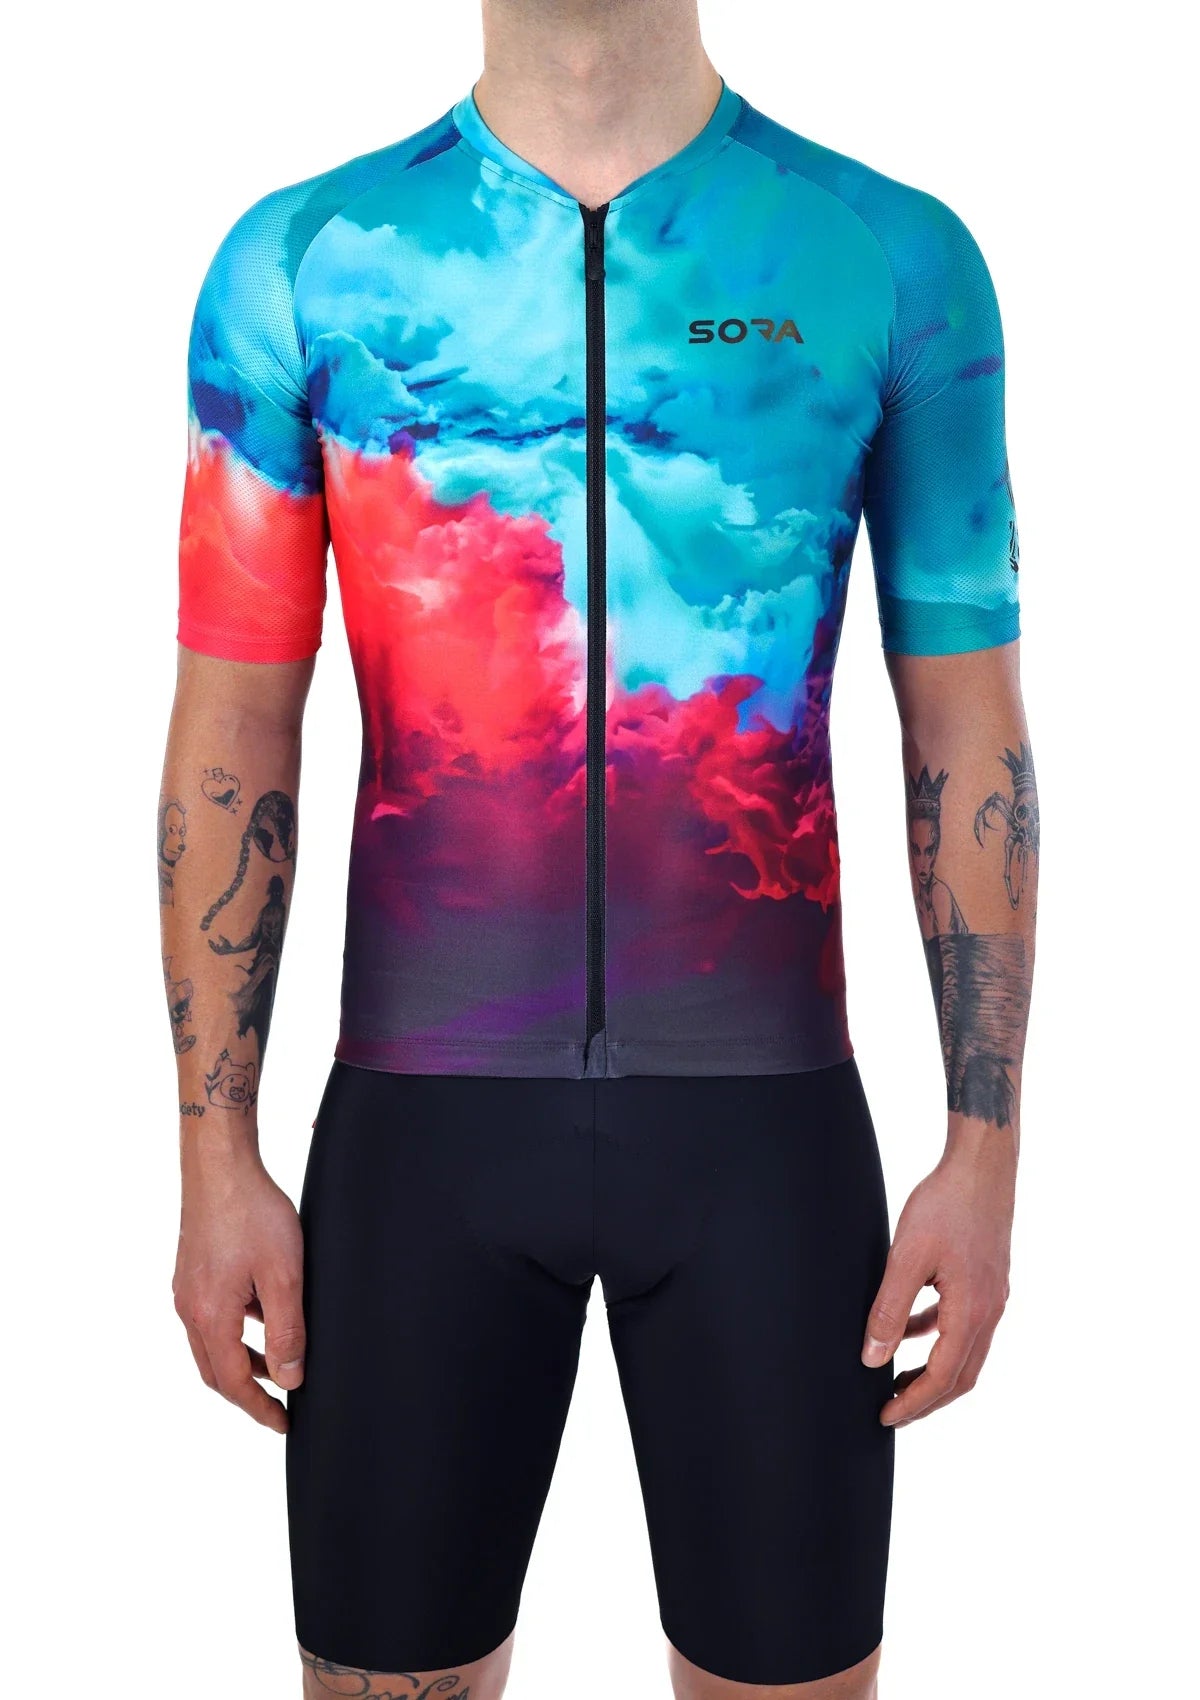 Classic cycling jersey Colorrush